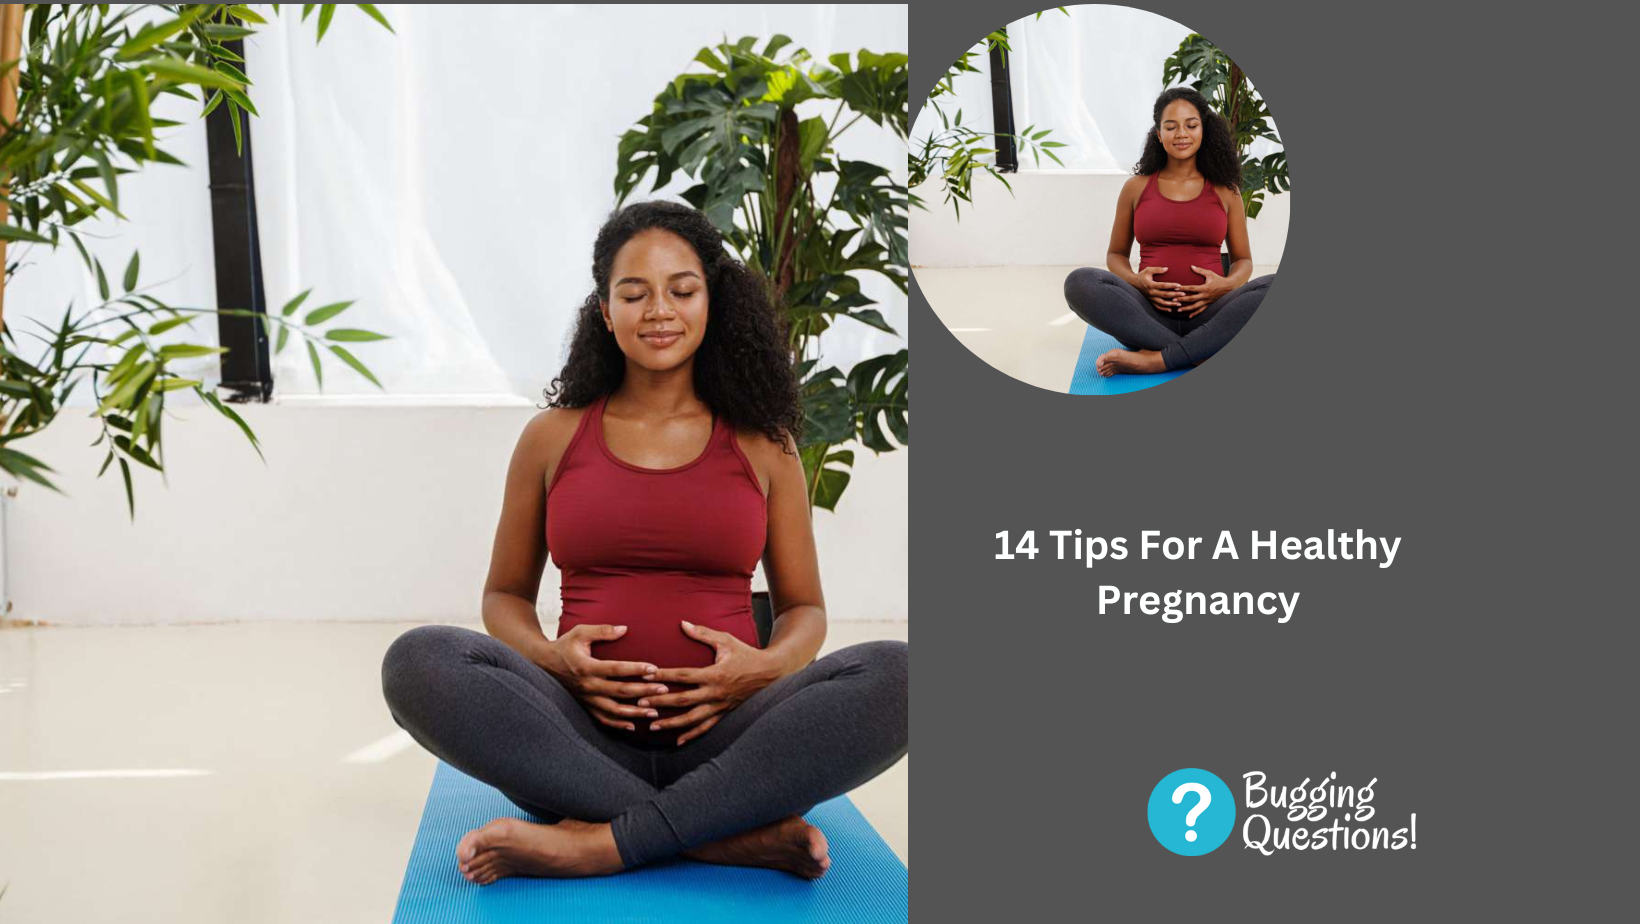 14 Tips For A Healthy Pregnancy